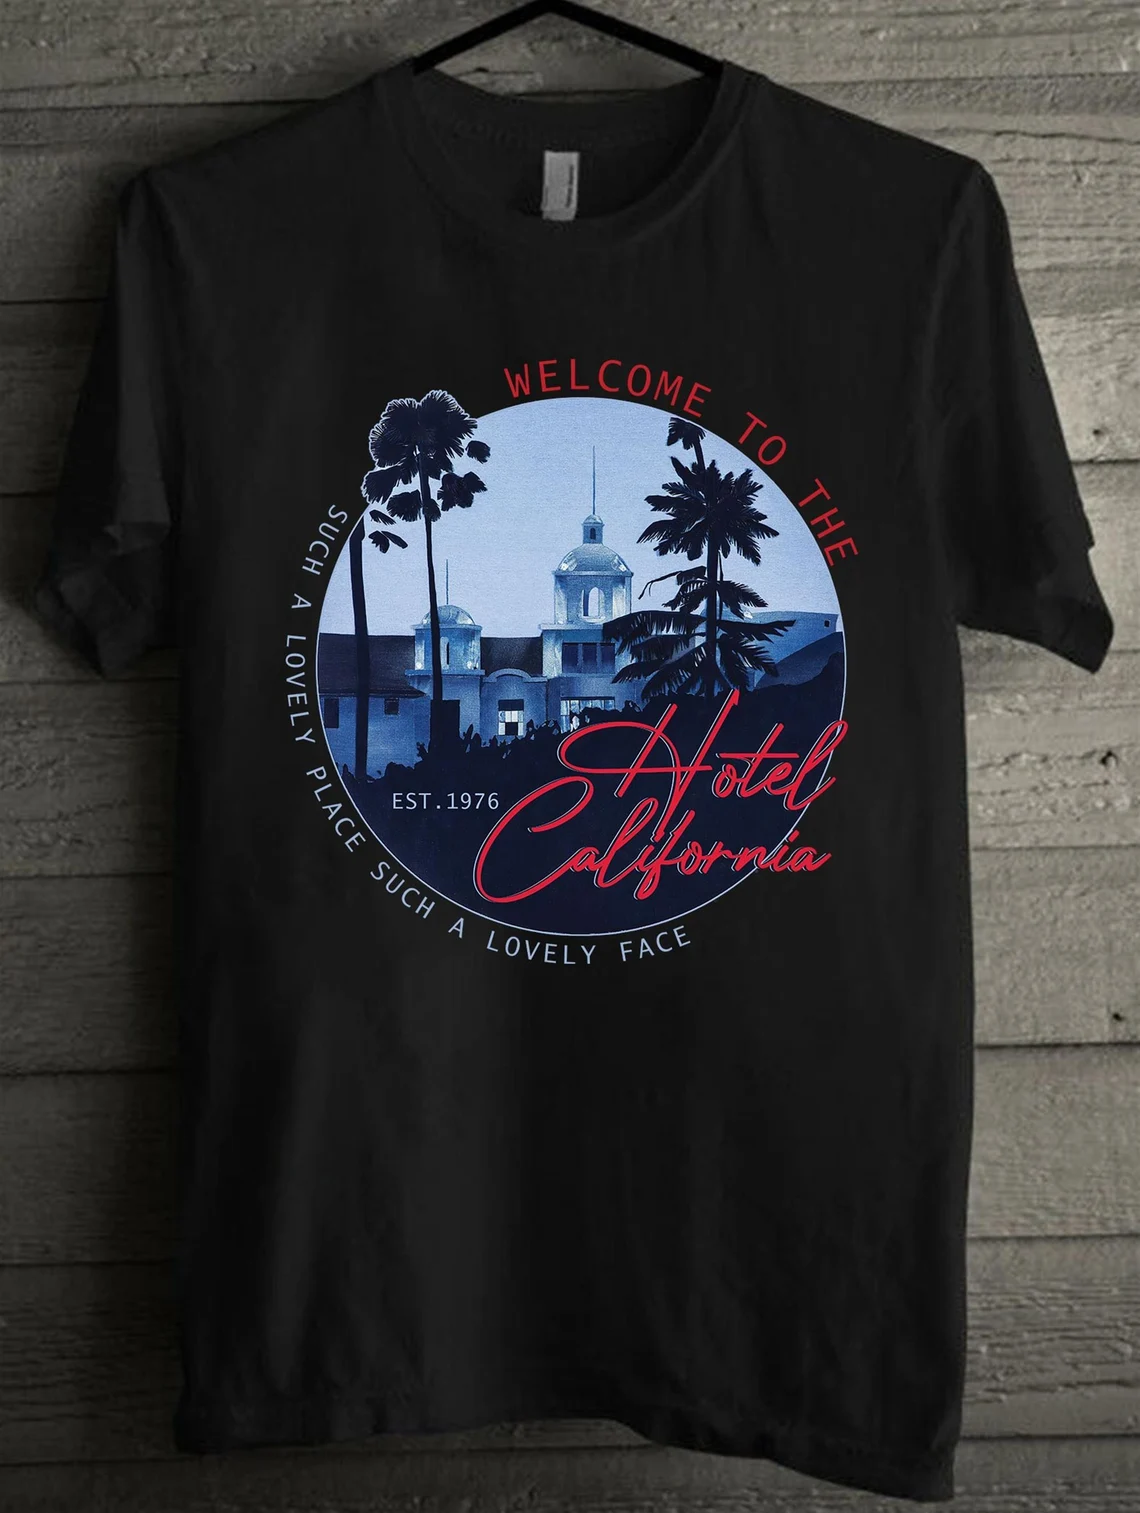 Eagles Welcome To The Hotel California Unisex T-shirt Eagles Band Shirt Eagles Lover Shirt Music Shirt Vintage Shirt